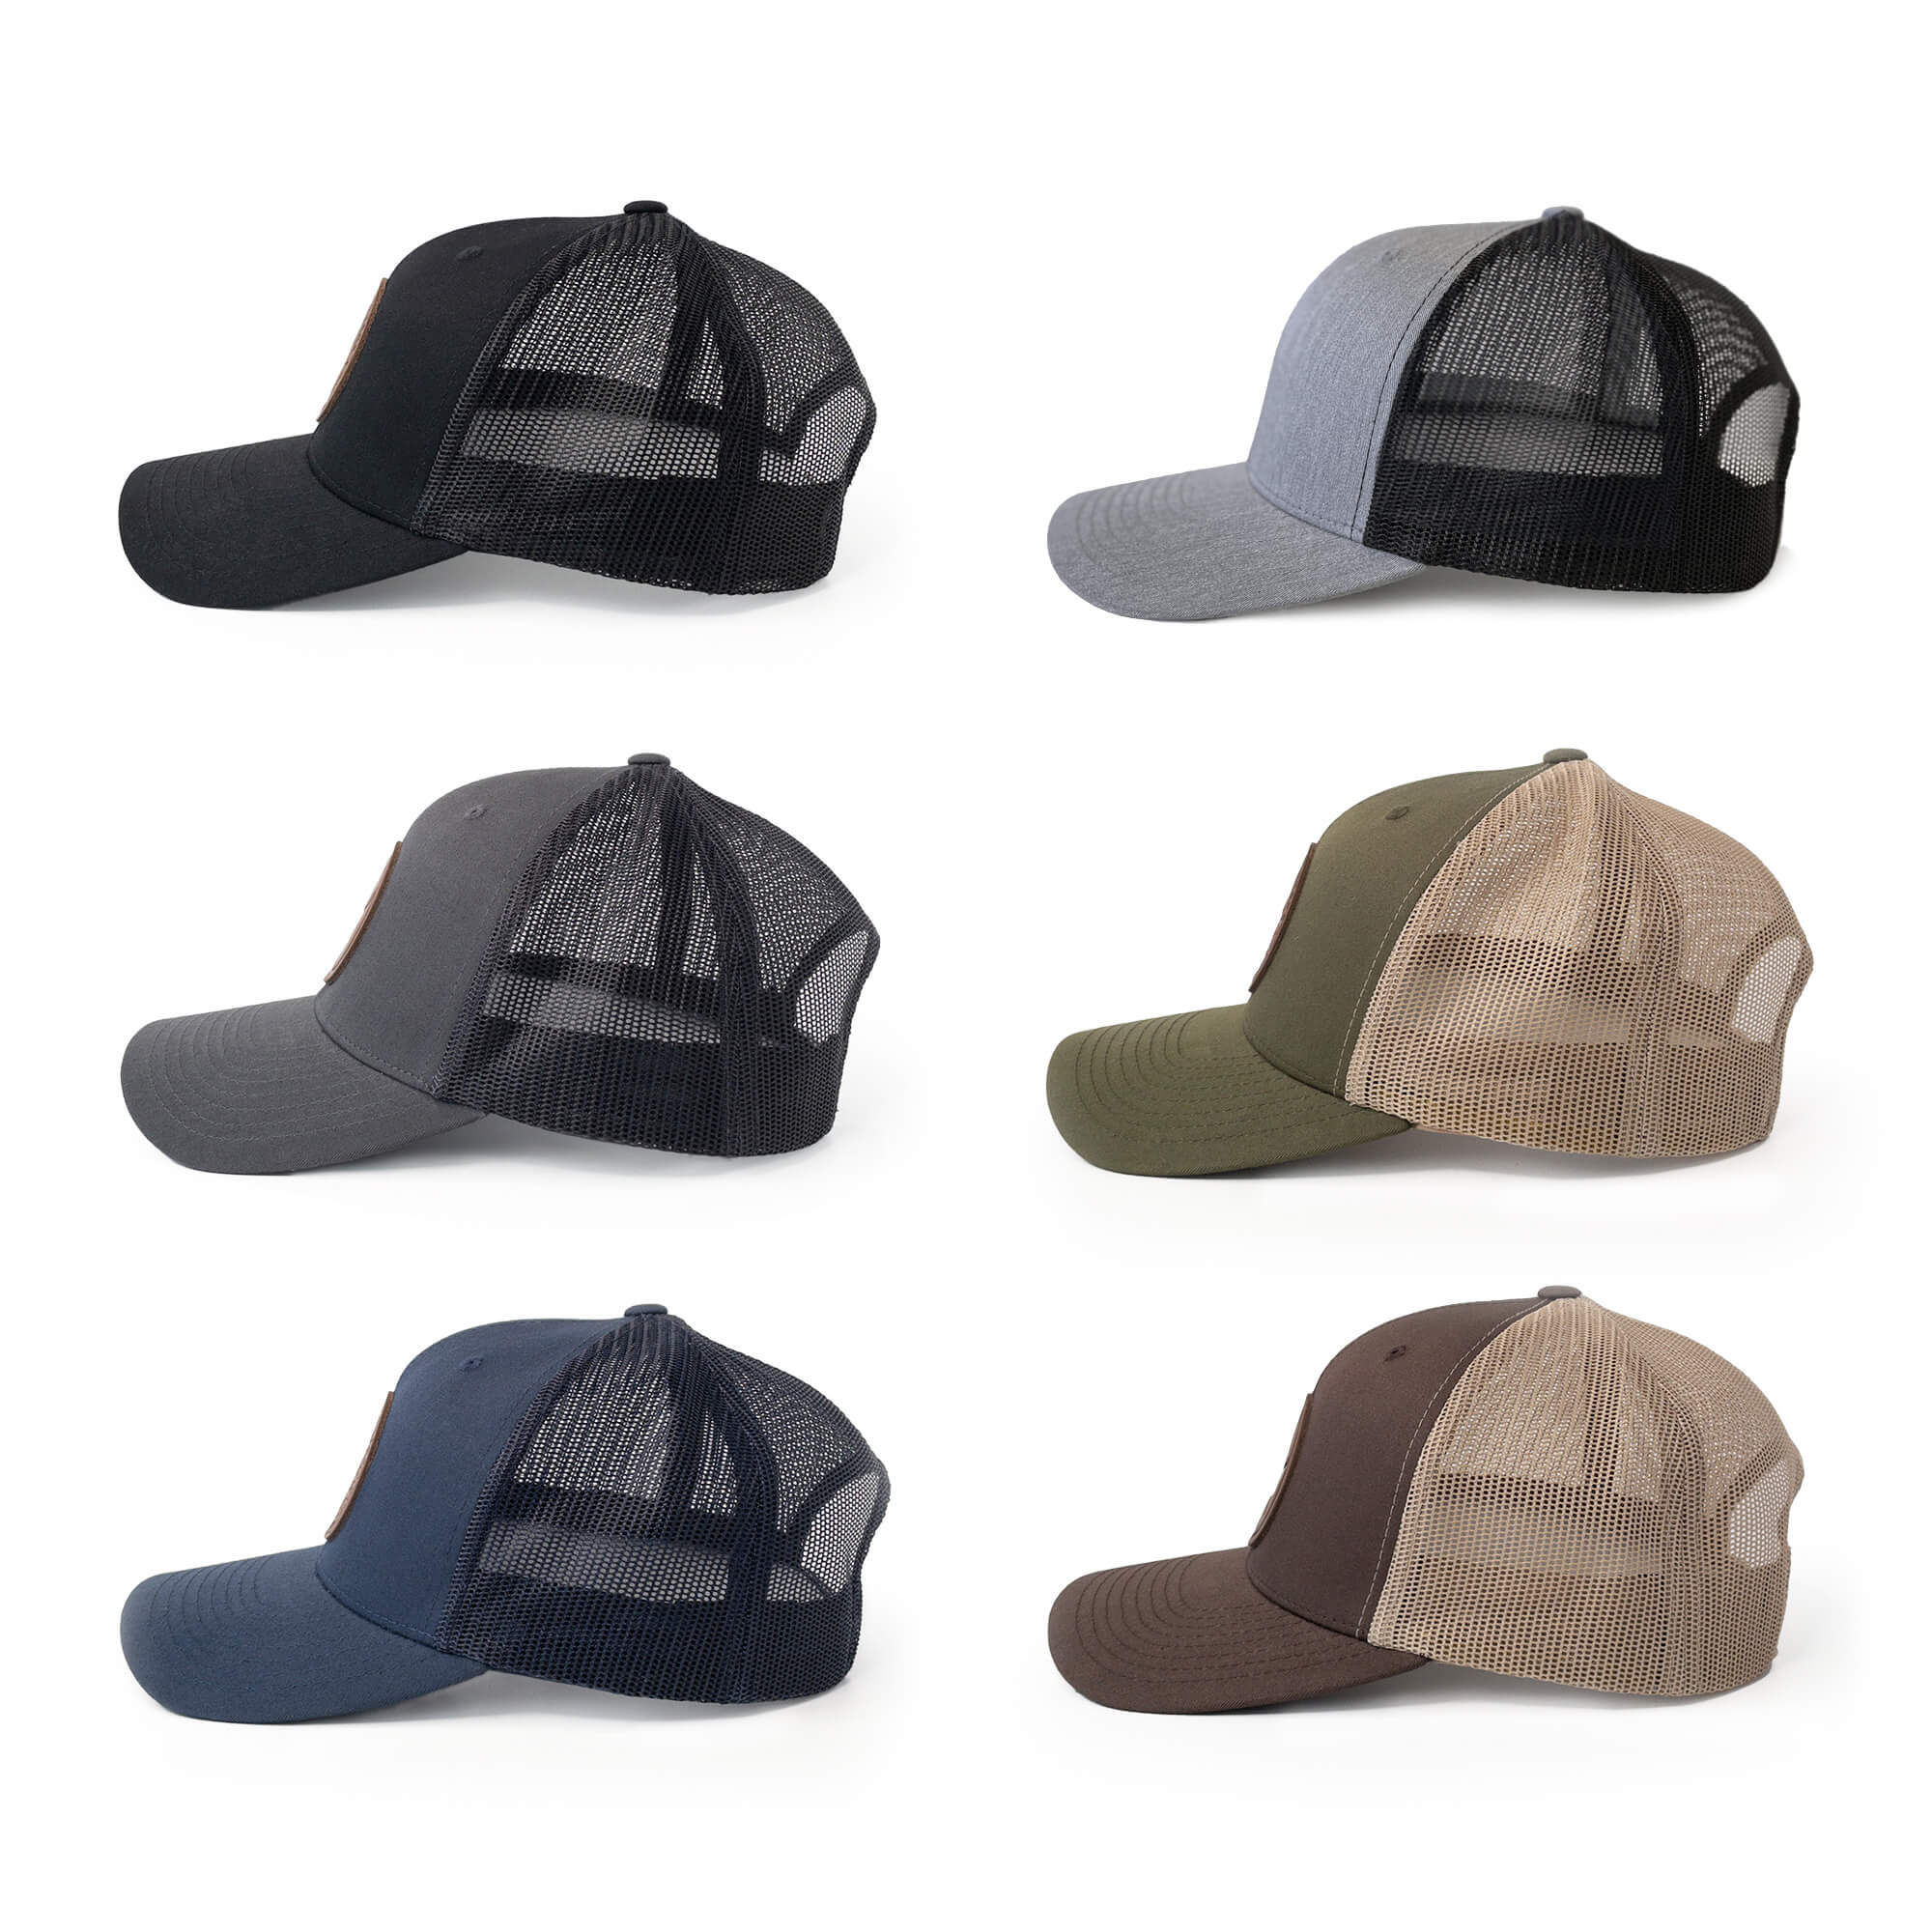 Leather patch trucker hats available in 6 colors | BLACK-005-002, CHARC-005-002, NAVY-005-002, HGREY-005-002, MOSS-005-002, BROWN-005-002